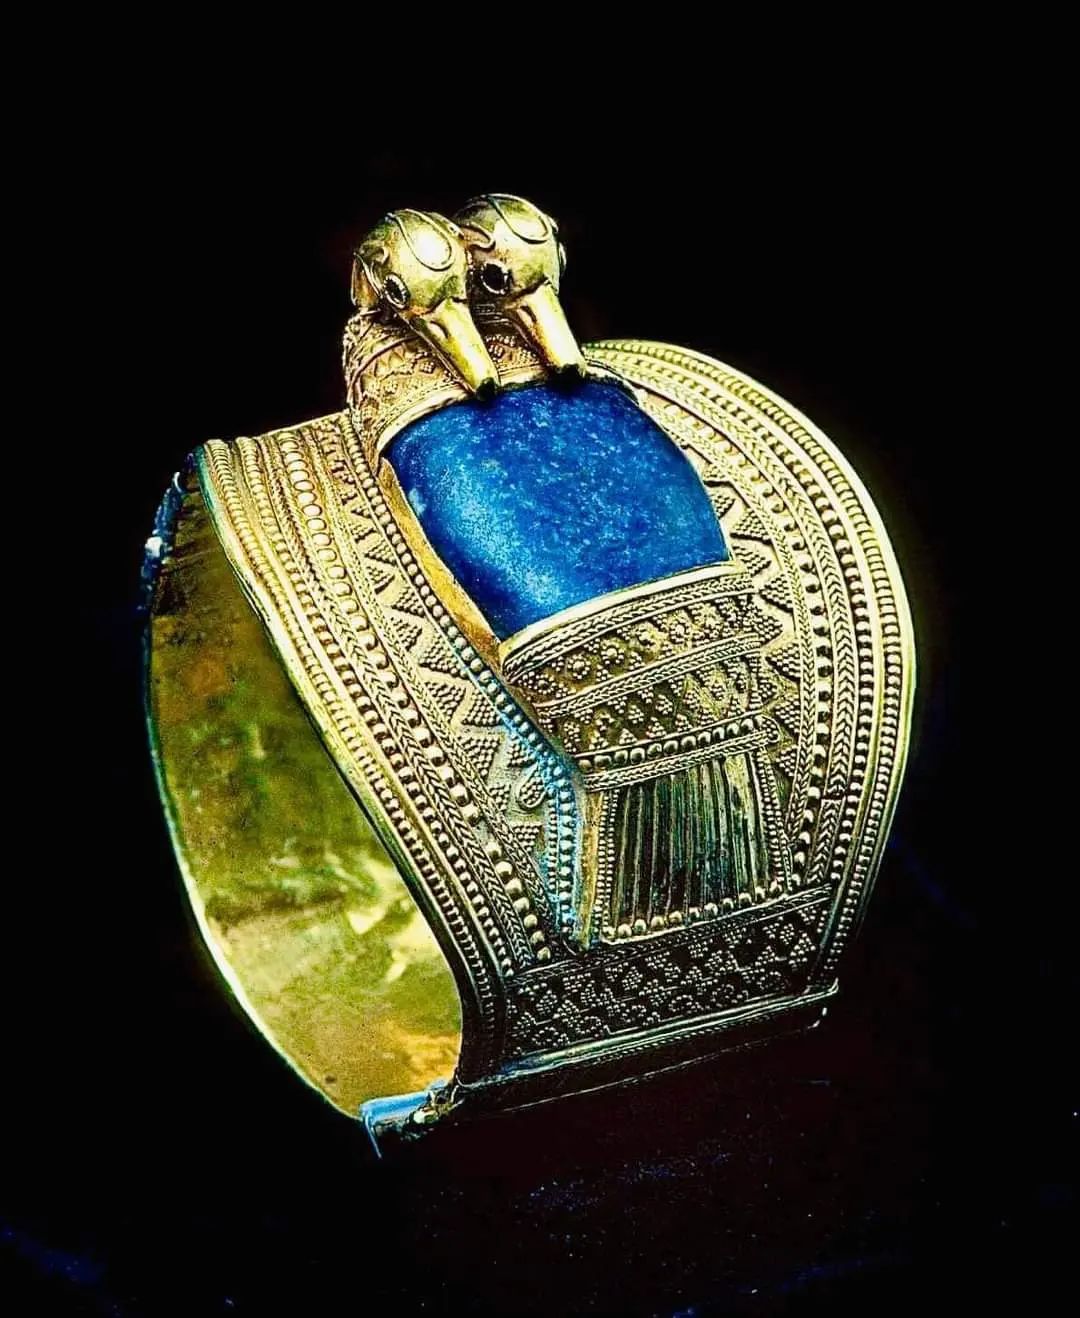 A gold bracelet showing two ducks, from the 19th dyansty of Egypt (c. 1279-1213 B.C.) that once belonged to King Ramesses II.jpg